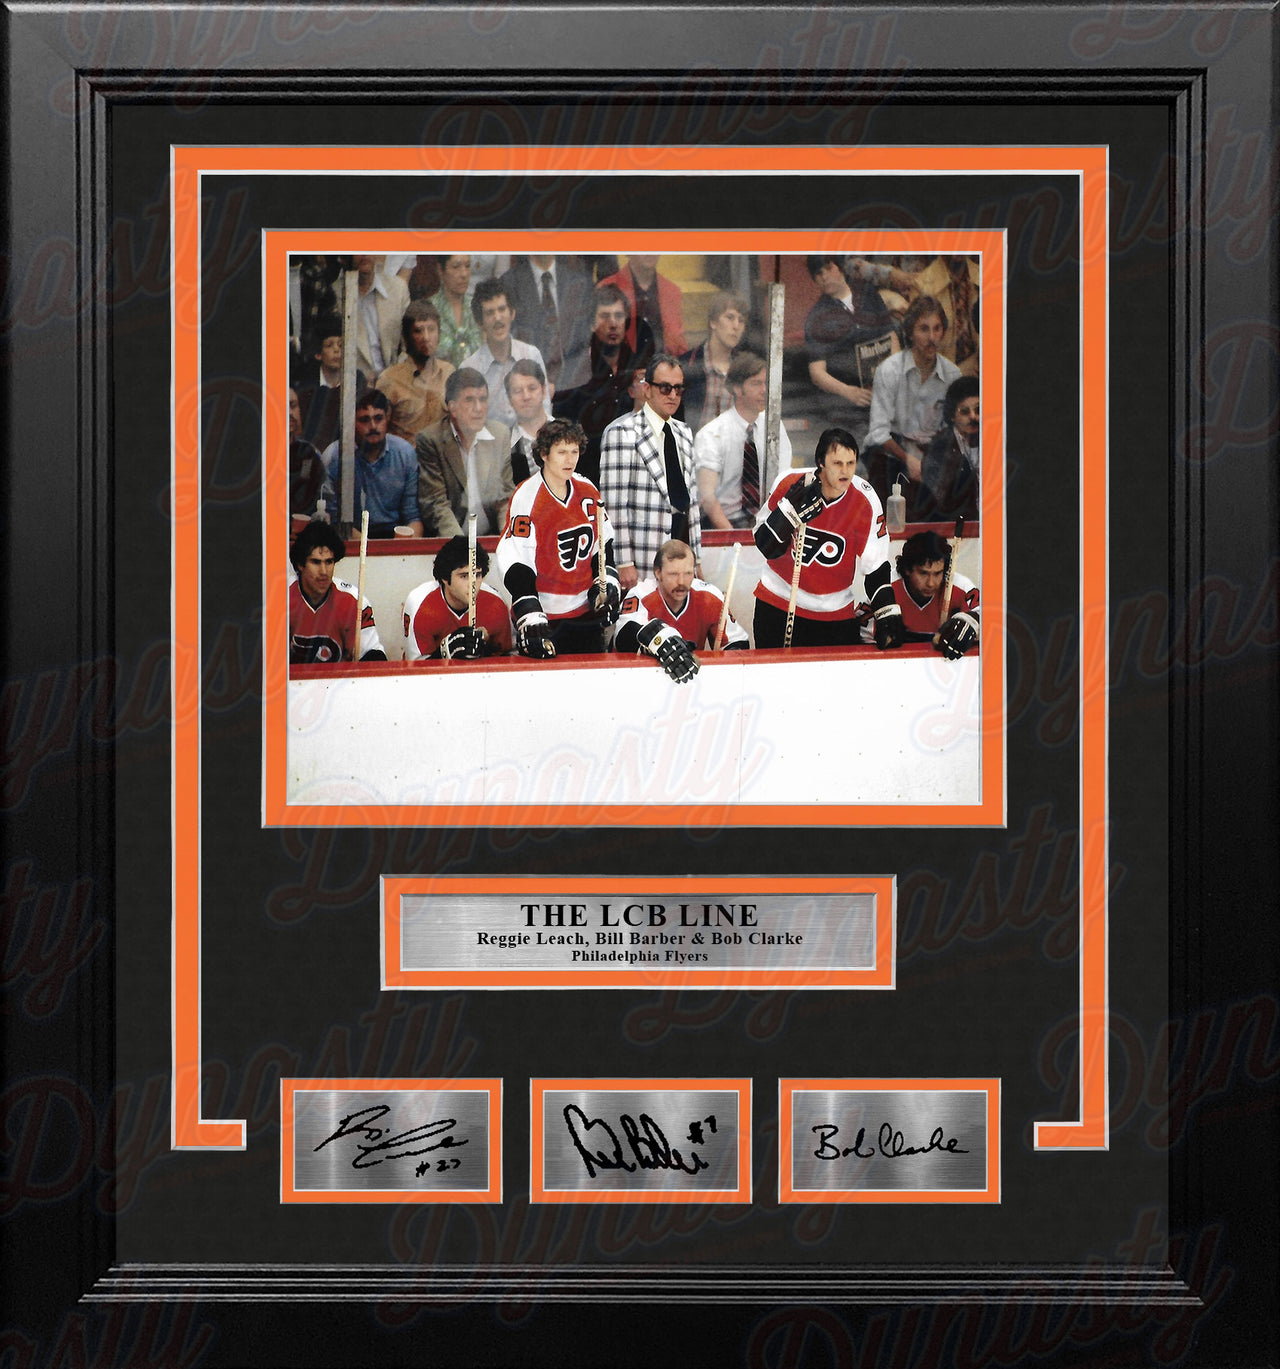 LCB Line Watching from the Bench Philadelphia Flyers Framed Hockey Photo with Engraved Autographs - Dynasty Sports & Framing 